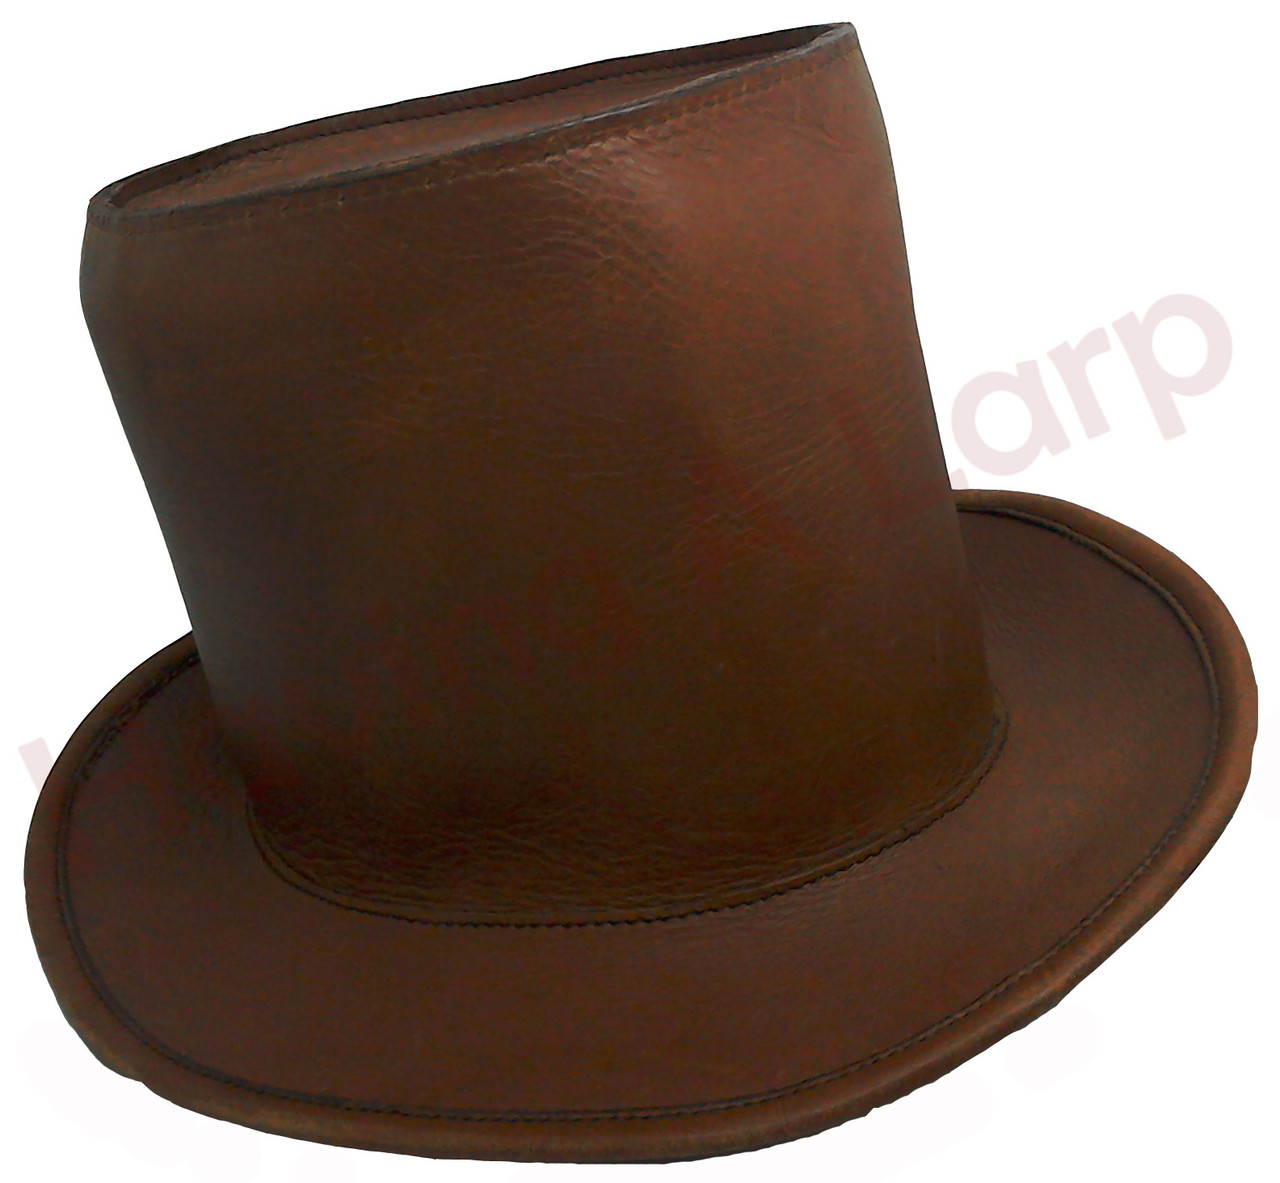 Leather Top Hat - Having a Larp